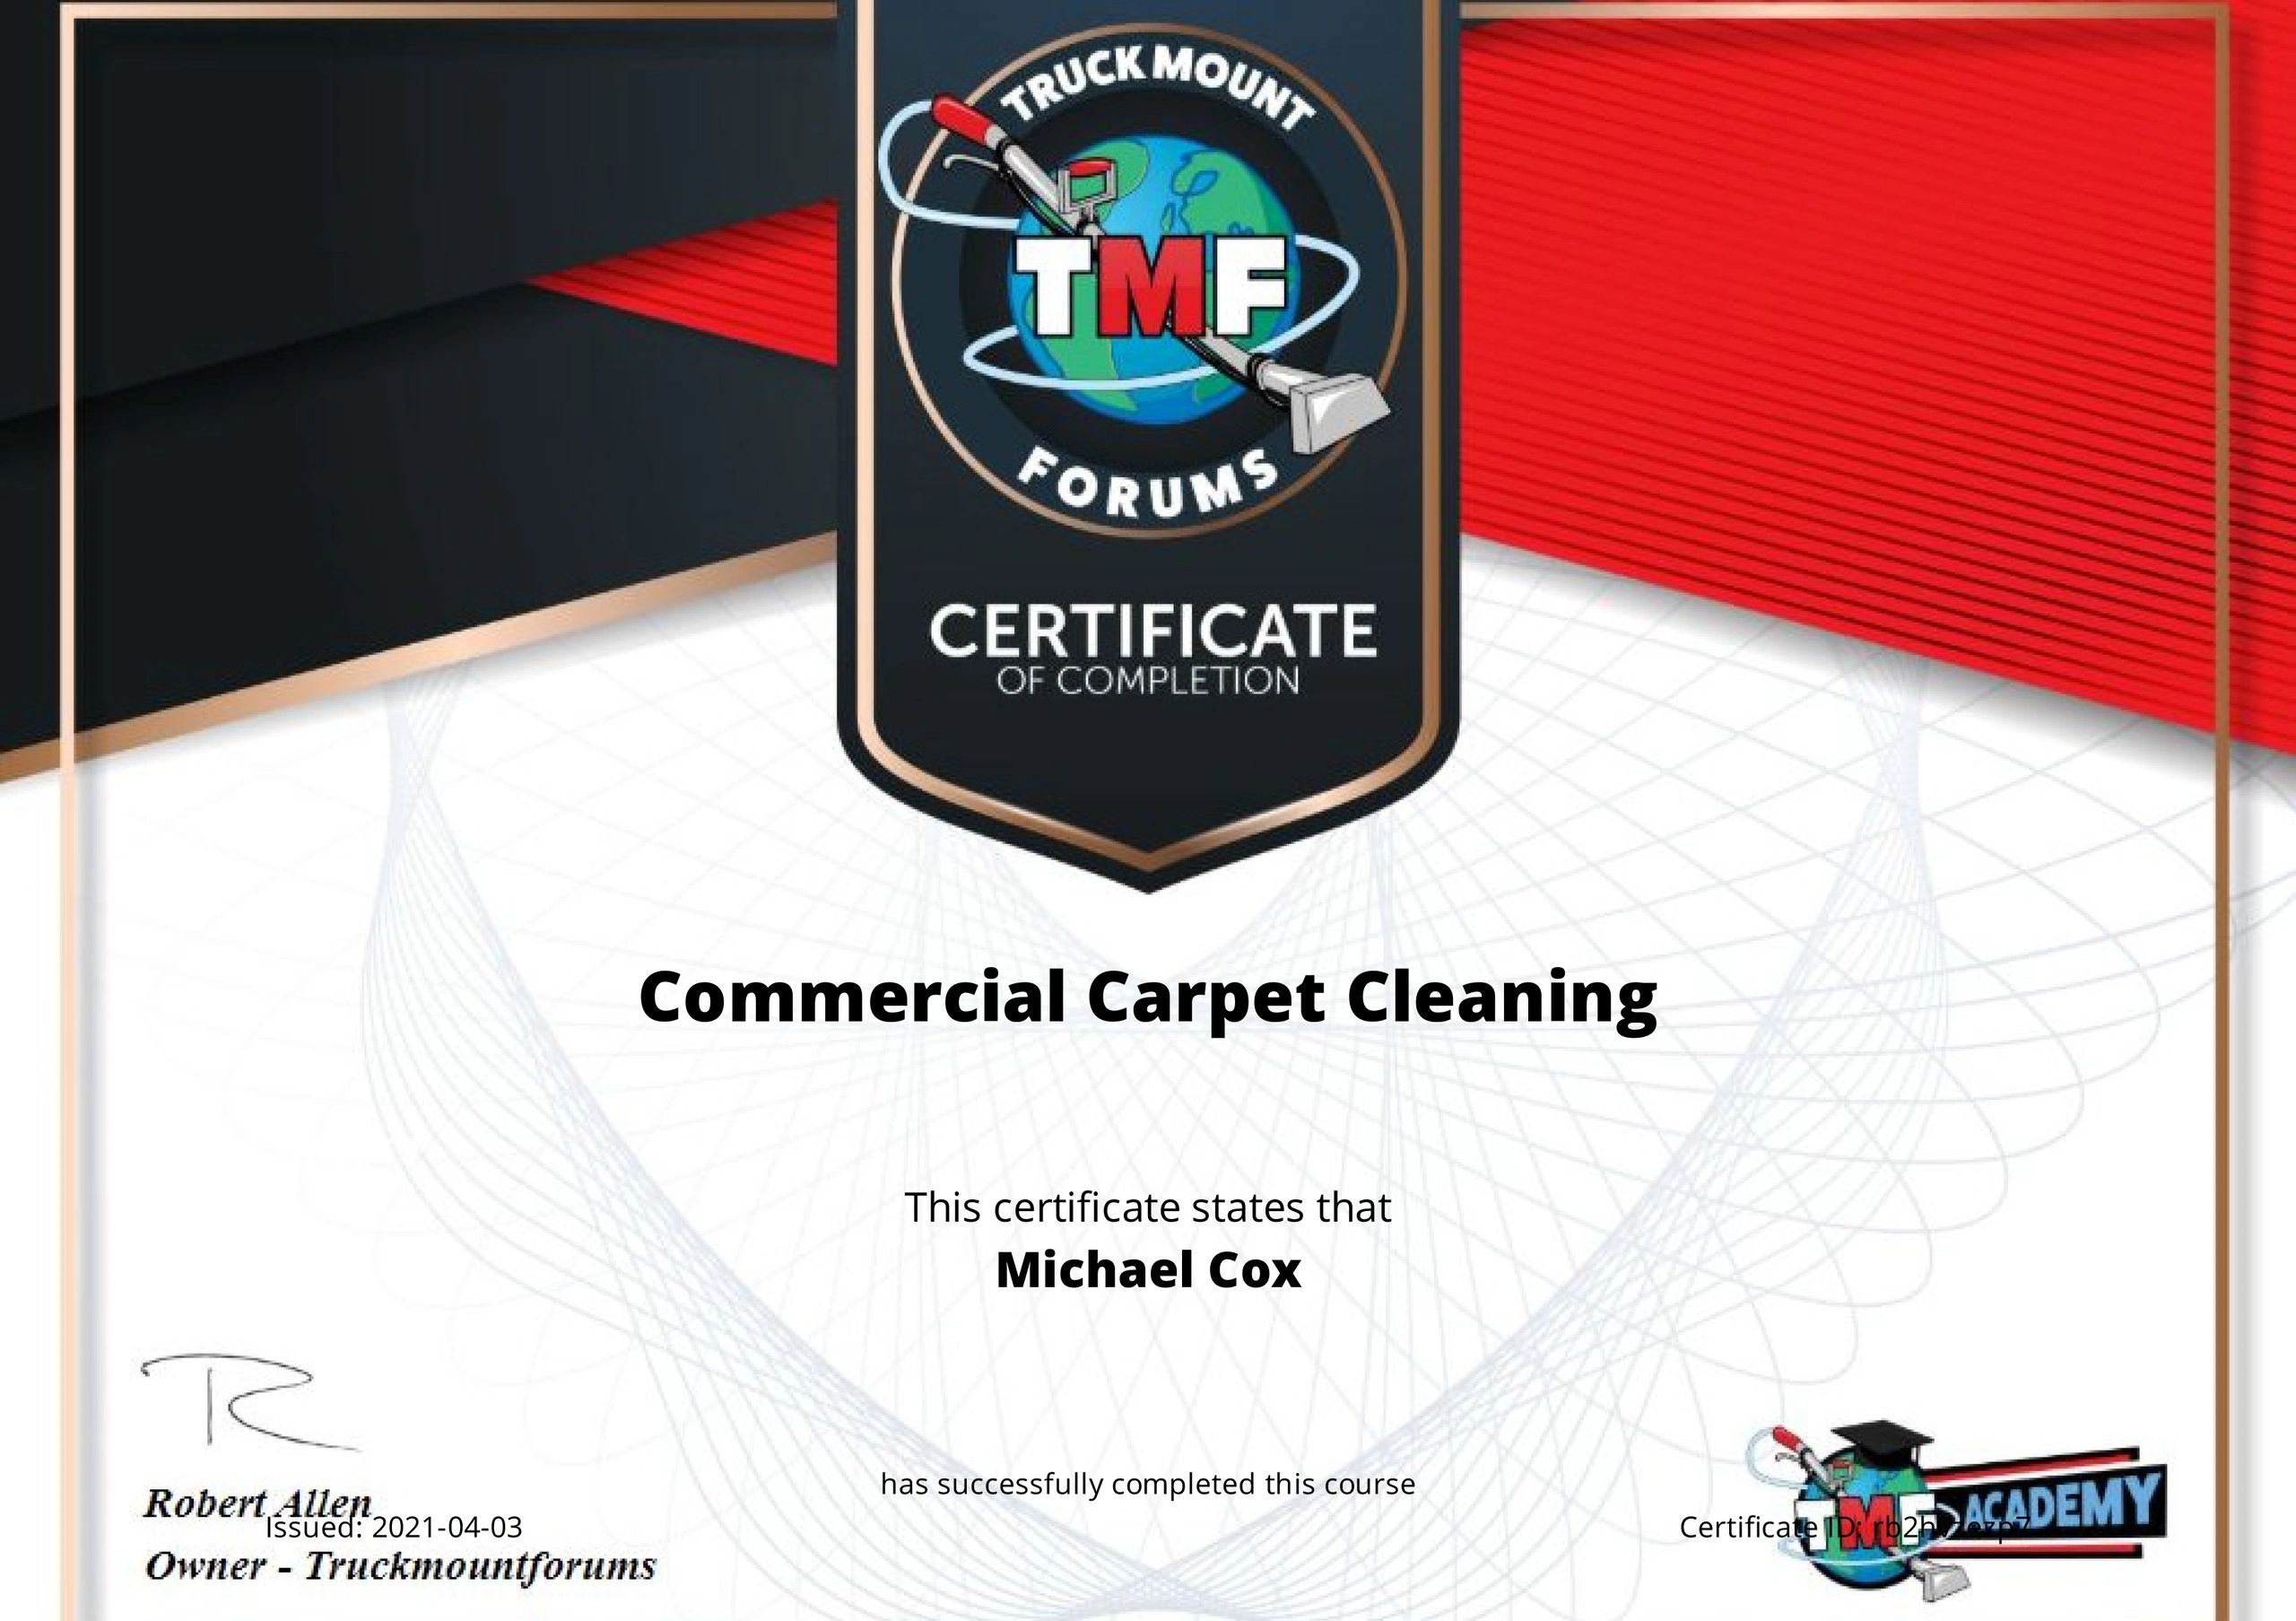 Certification in Commercial Carpet Cleaning